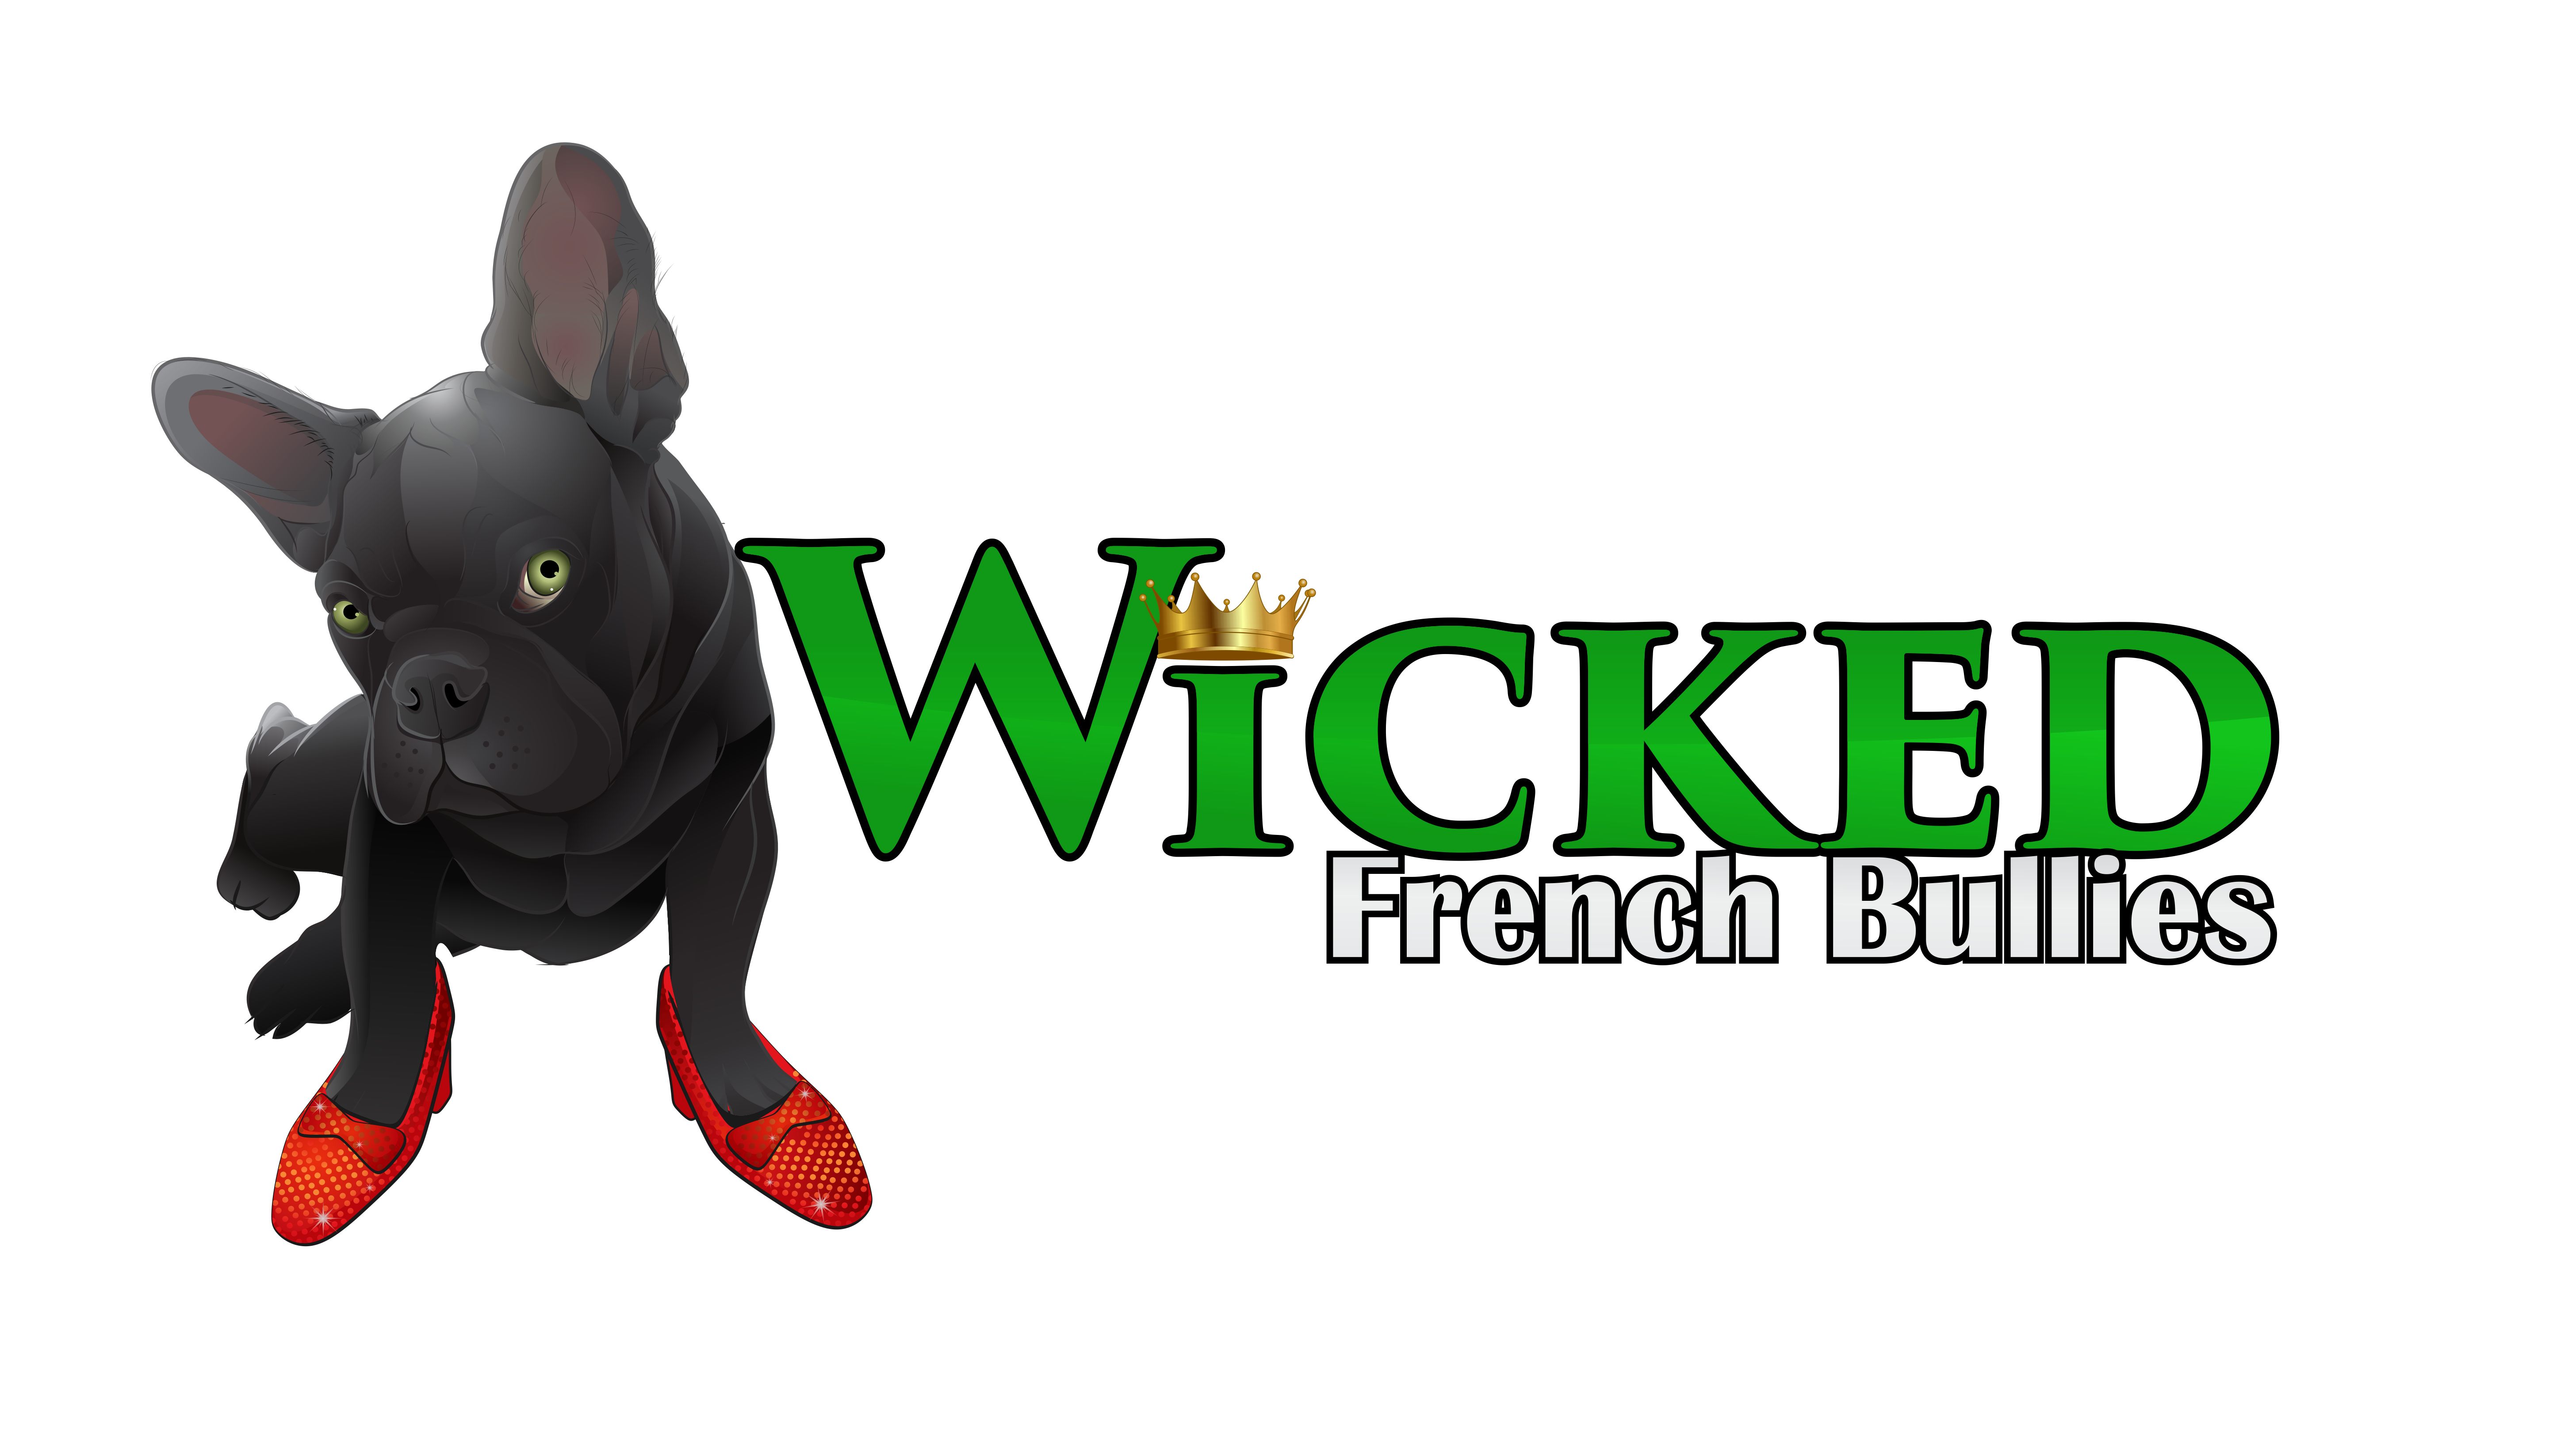 Wicked French Bullies